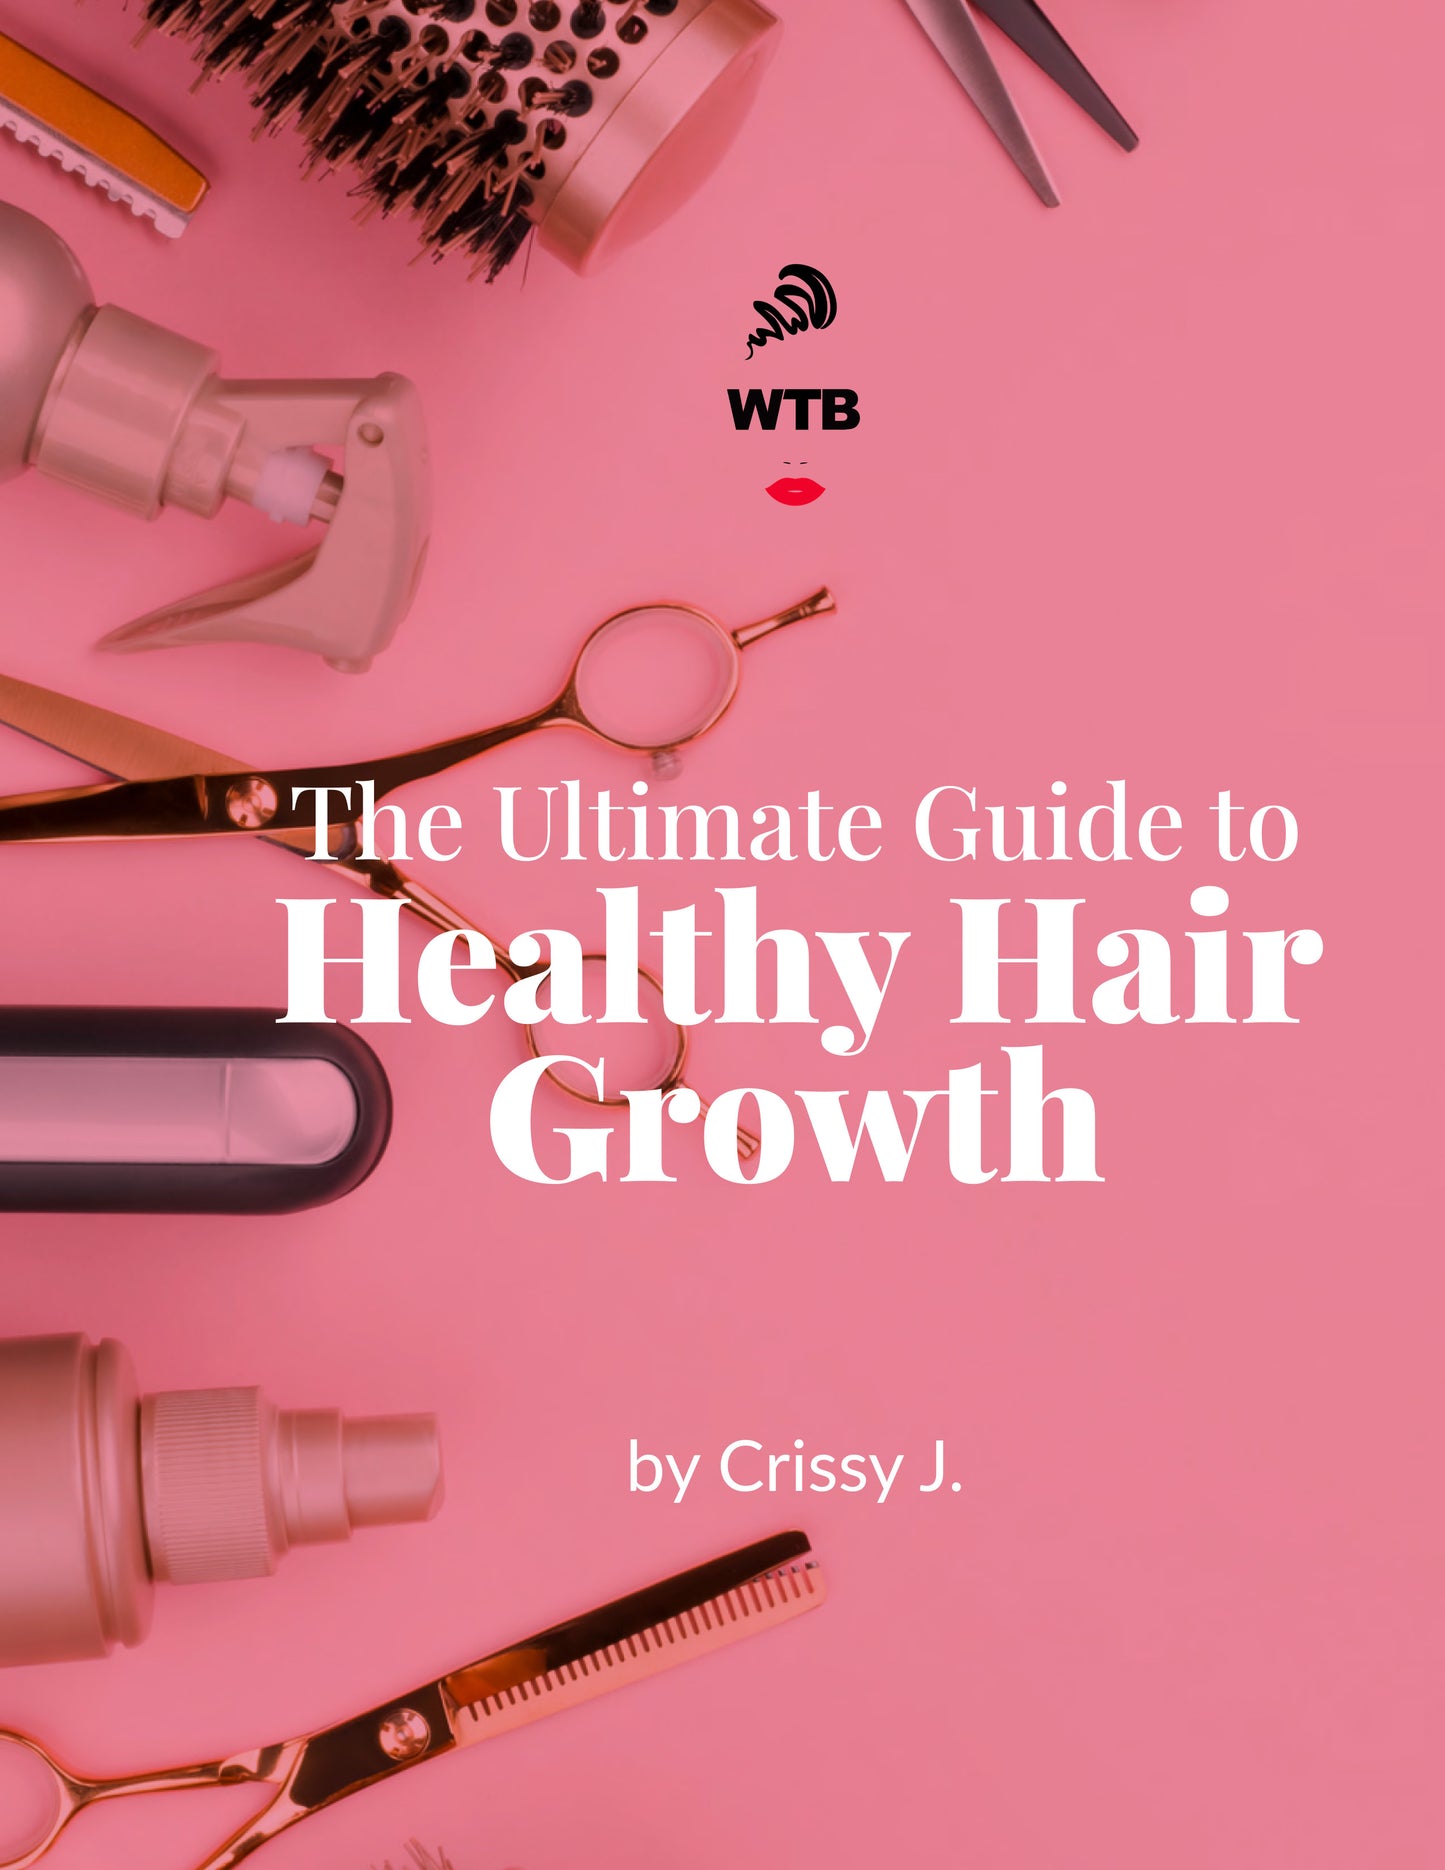 The Ultimate Guide to Healthy Hair Growth